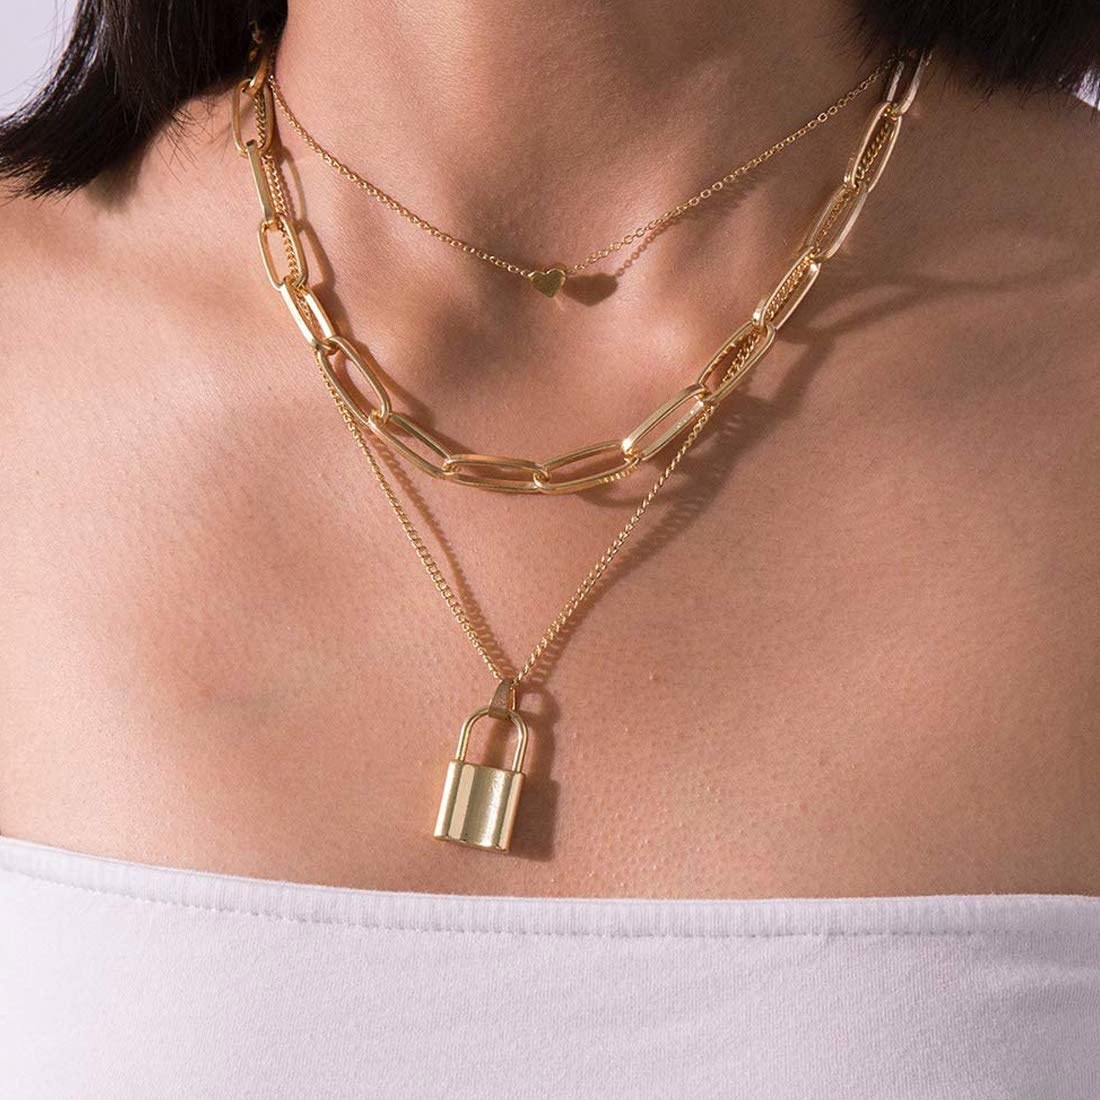 A layered golden necklace consisting of a chain with a lock-shaped charm, a chunky chain, and a delicate chain with a tiny heart in the middle